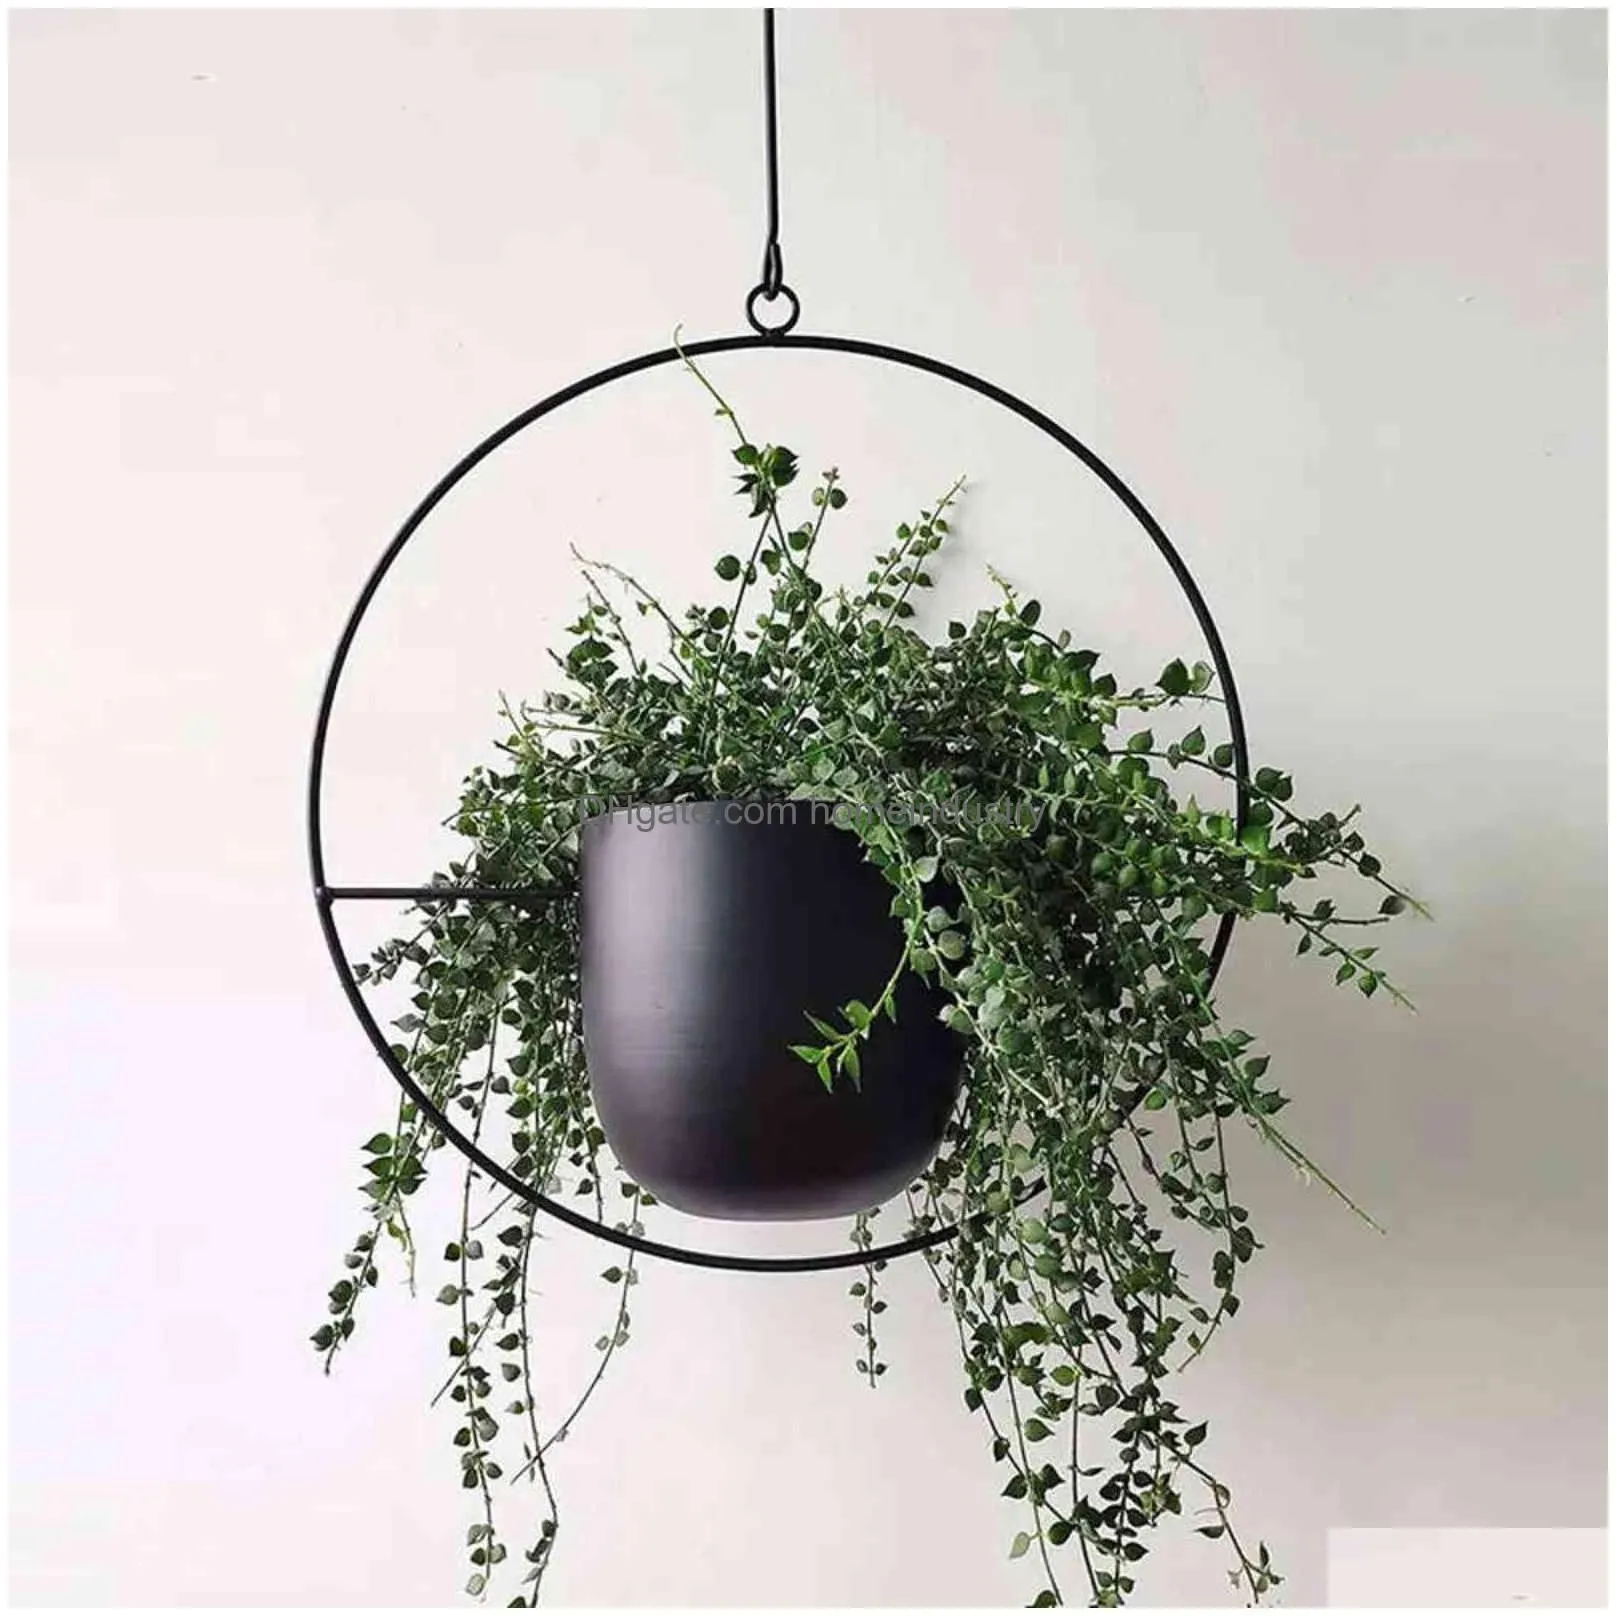 Planters & Pots Metal Iron Hanging Flower Pot Decorative Swinging Basket Wall Mount 211027 Drop Delivery Home Garden Patio, Lawn Garde Dhqby